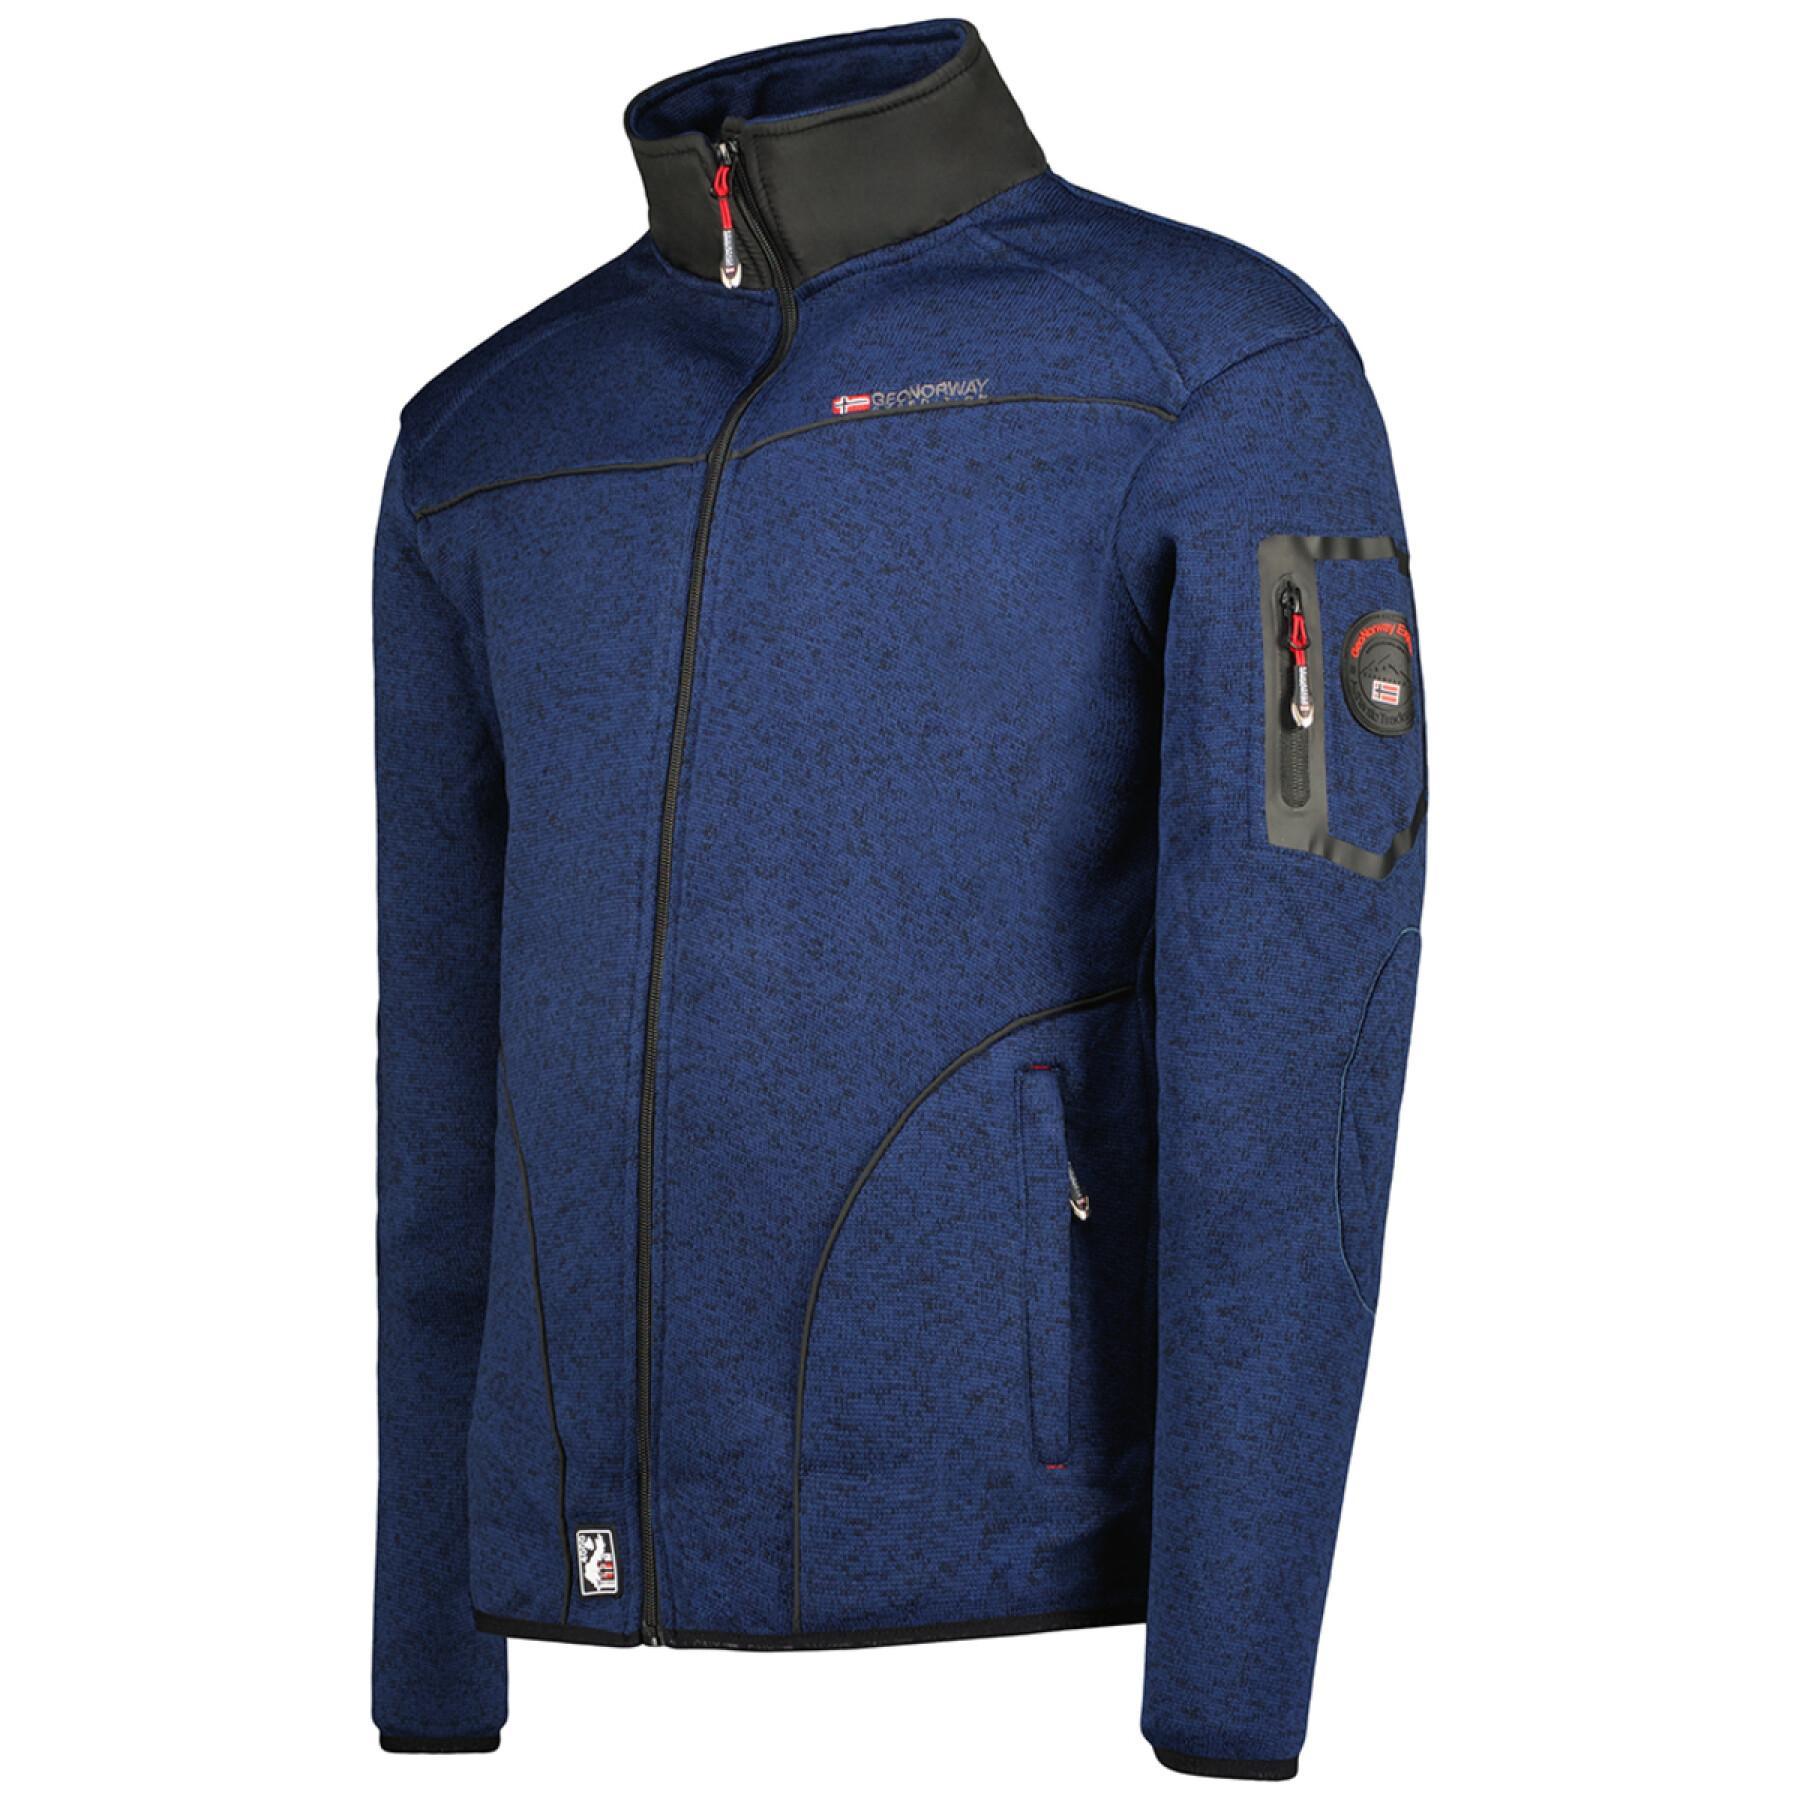 Vellón Geographical Norway Toumba Eo Db